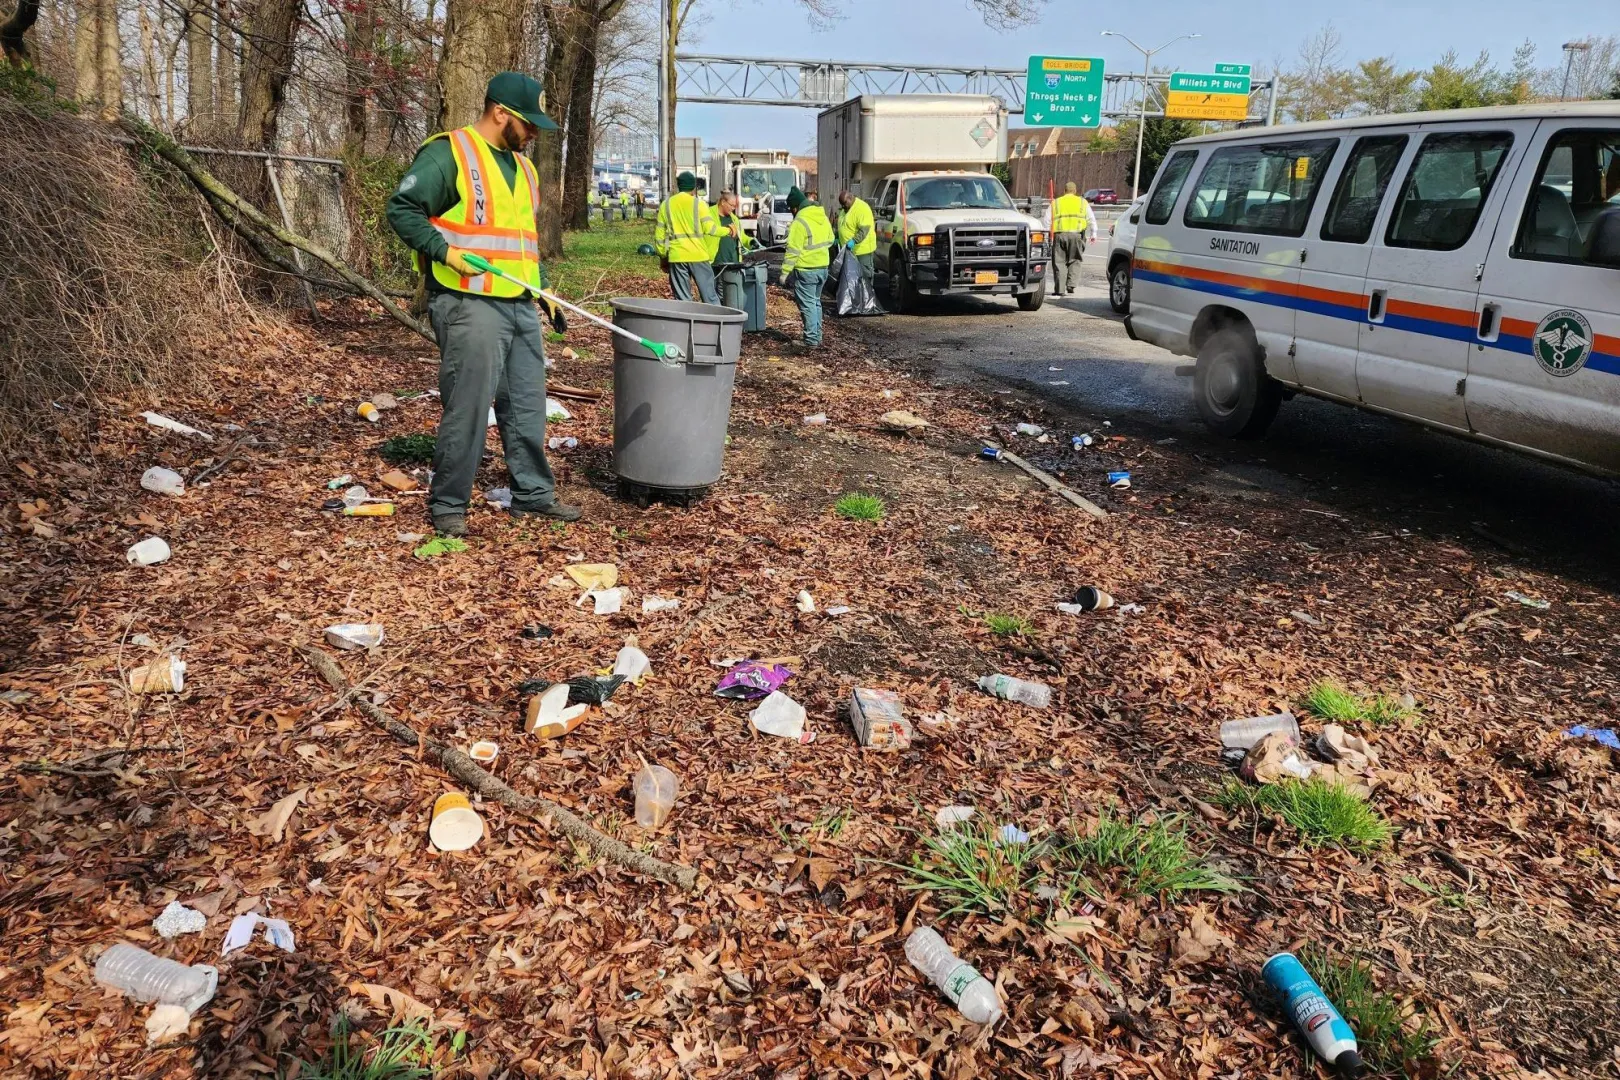 Local 983 Sanitation workers clean up litter along the Clearview Expressway in Queens. Photo courtesy of Department of Sanitation. City Parks Workers Haul 4-foot Alligator from Brooklyn’s Prospect Park Lake